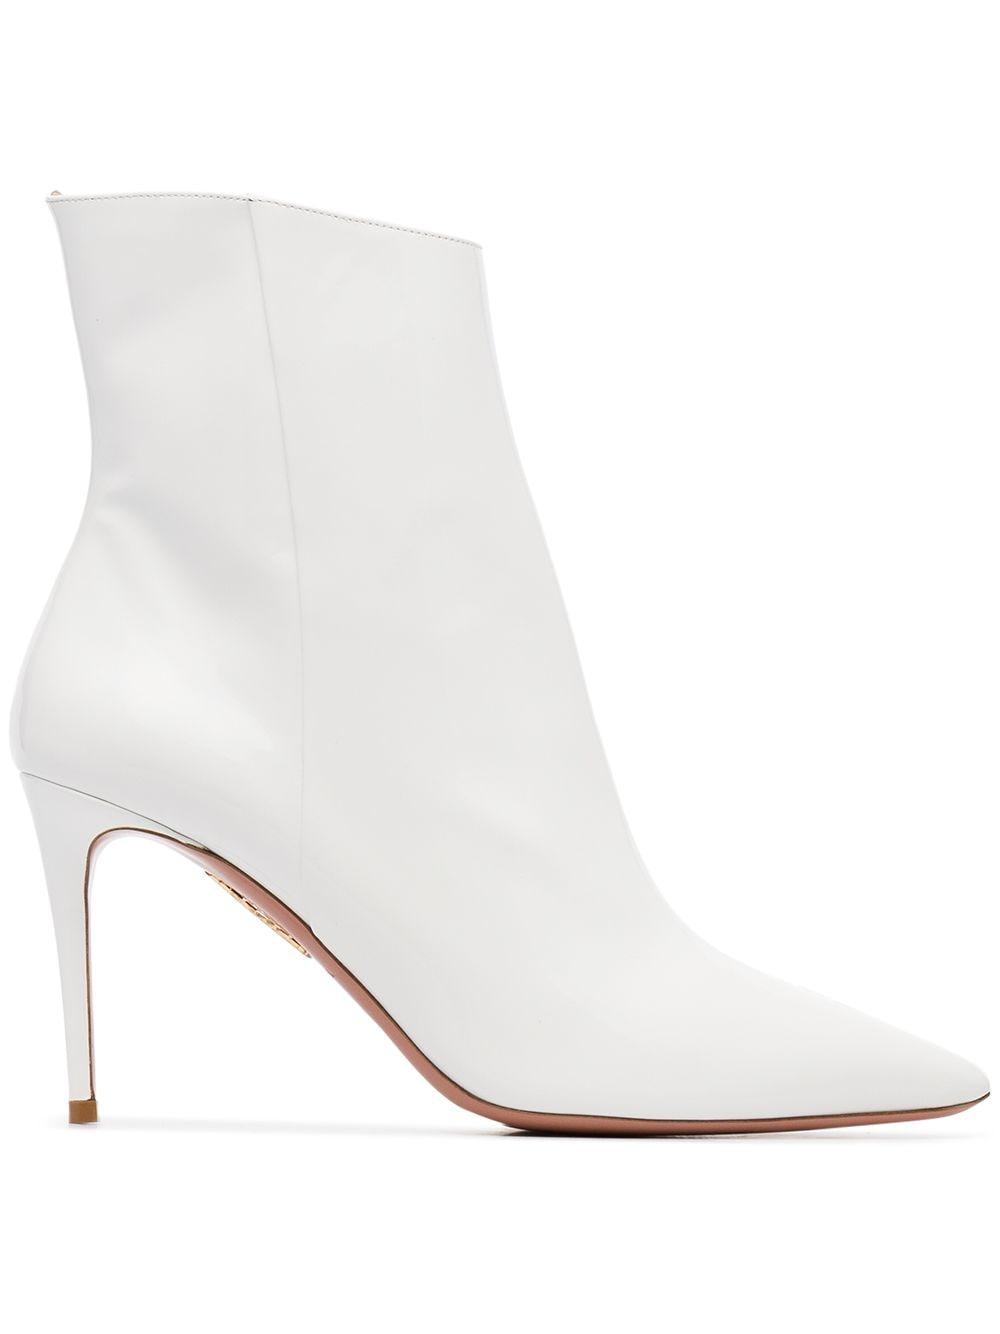 Aquazzura Alma 85 Patent Leather Ankle Boots in White - Lyst